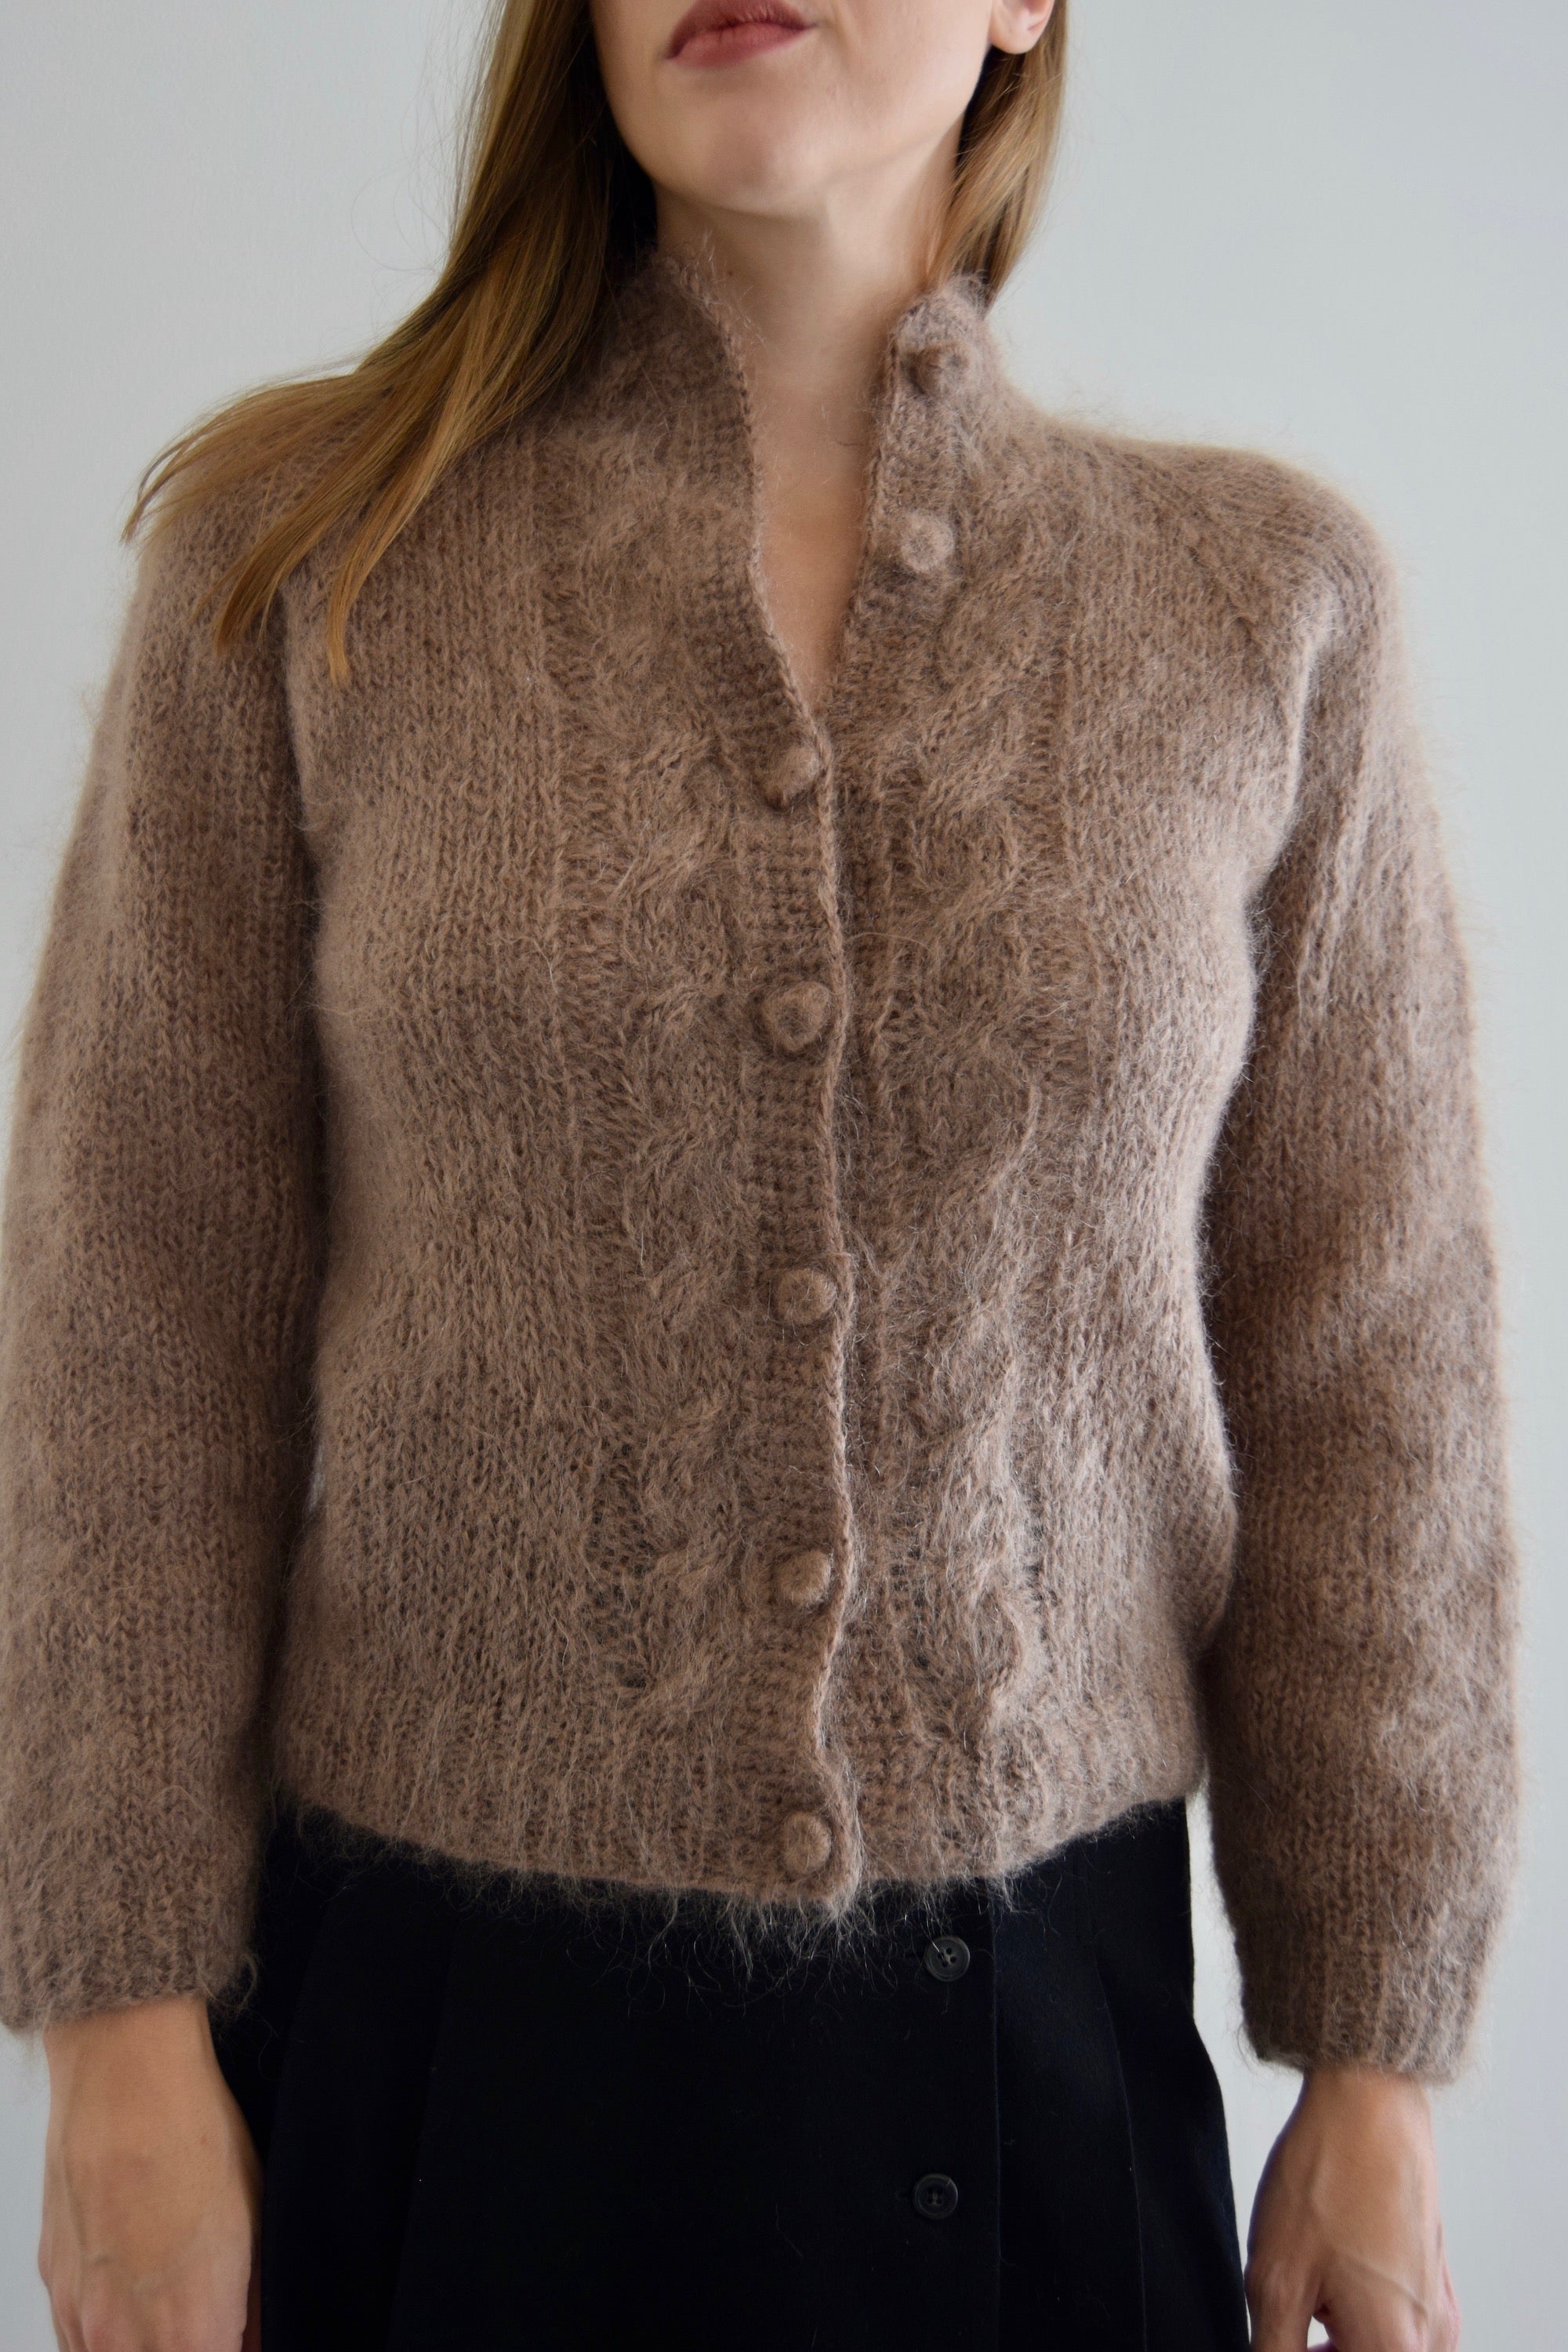 Mousy Brown Mohair Cardigan